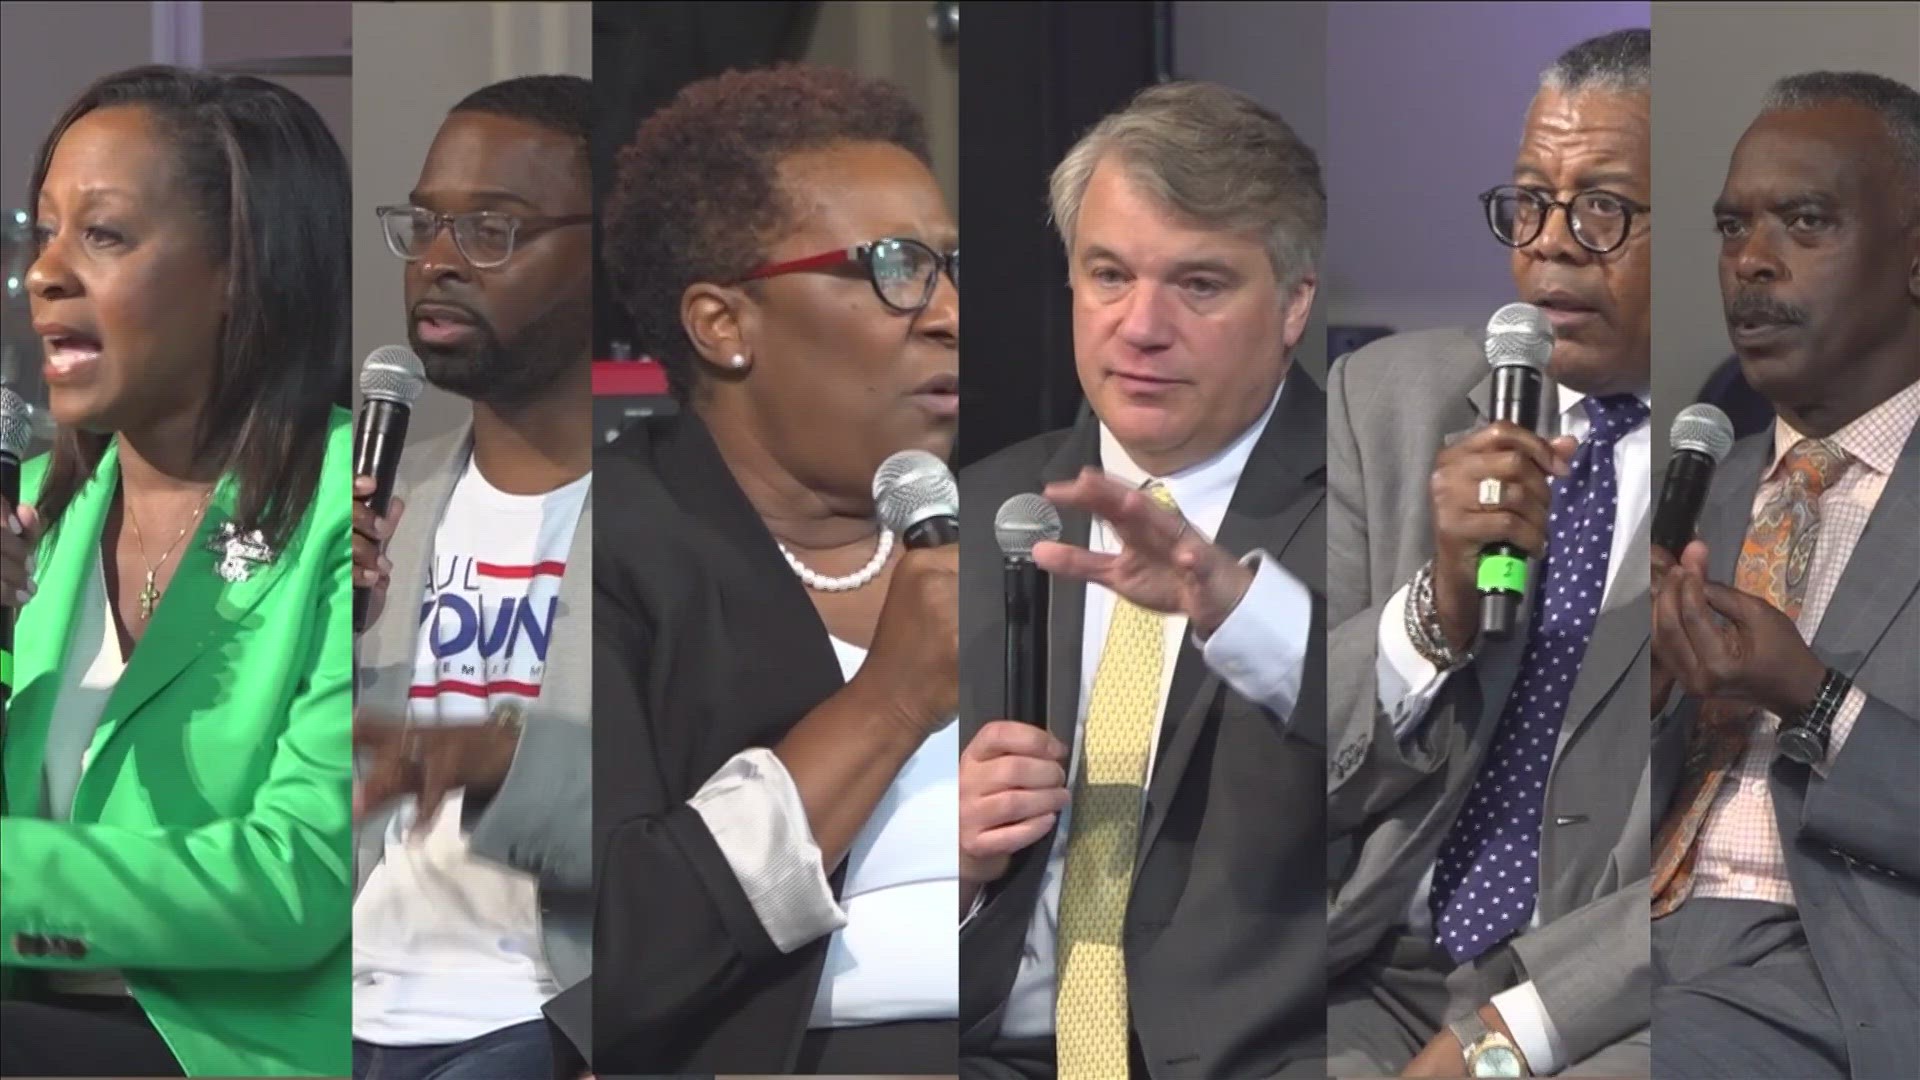 The race continues to be the next mayor of Memphis. On April 29, voters got a chance to hear from six of the candidates vying for the position.